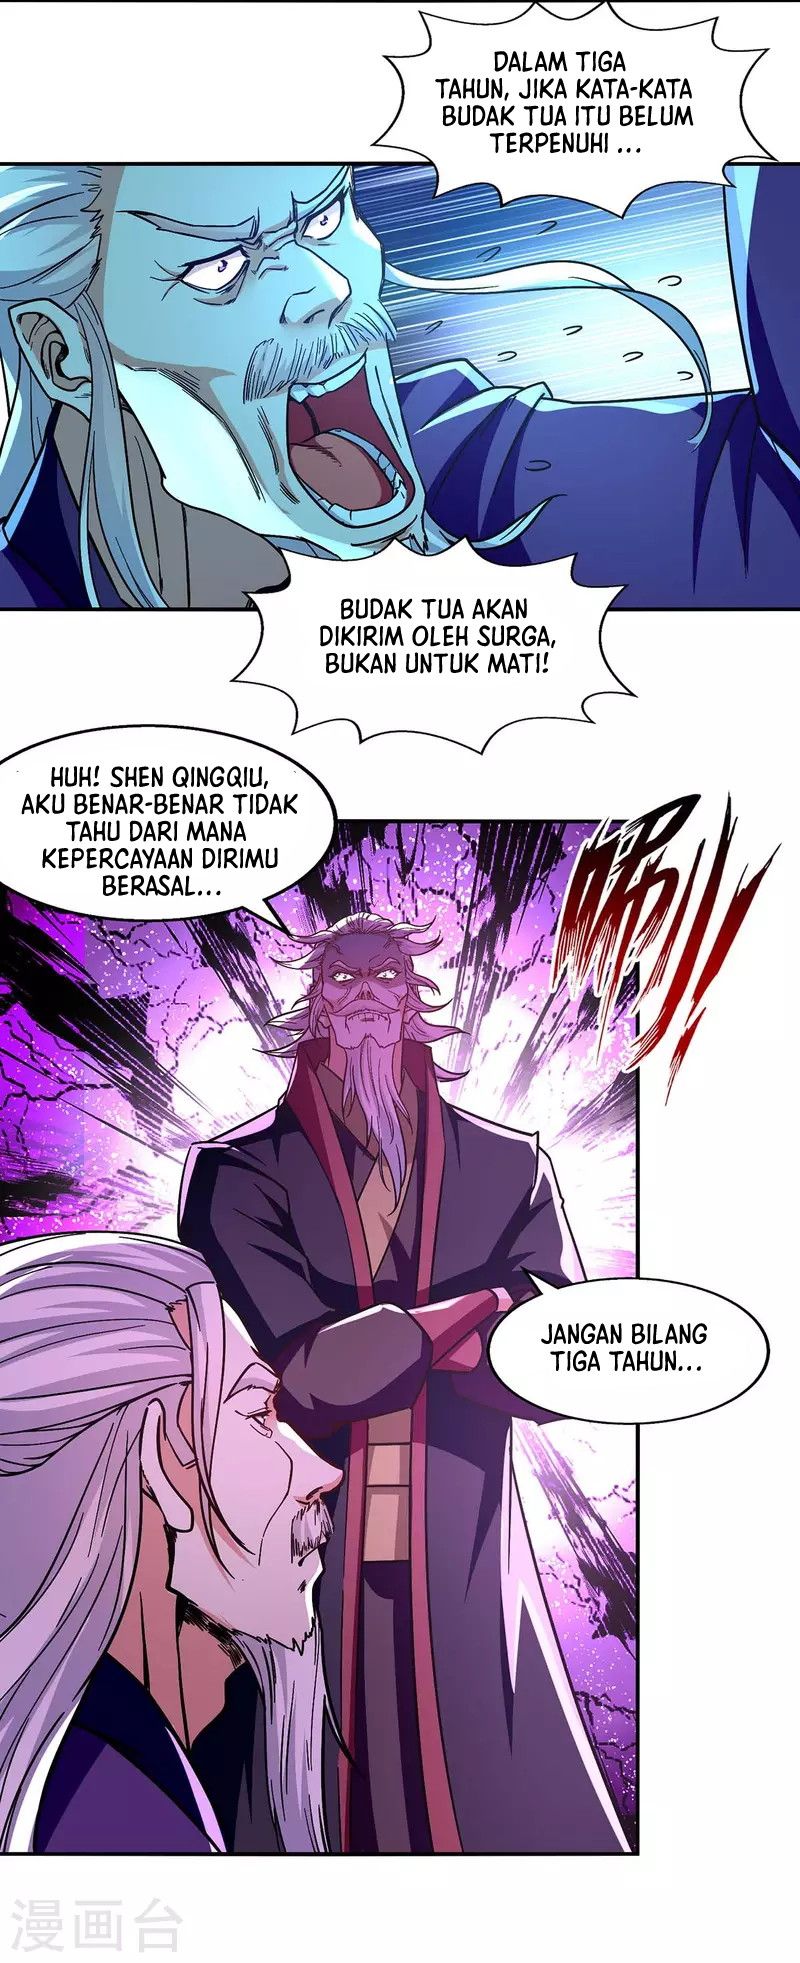 Against The Heaven Supreme (Heaven Guards) Chapter 93 - 159